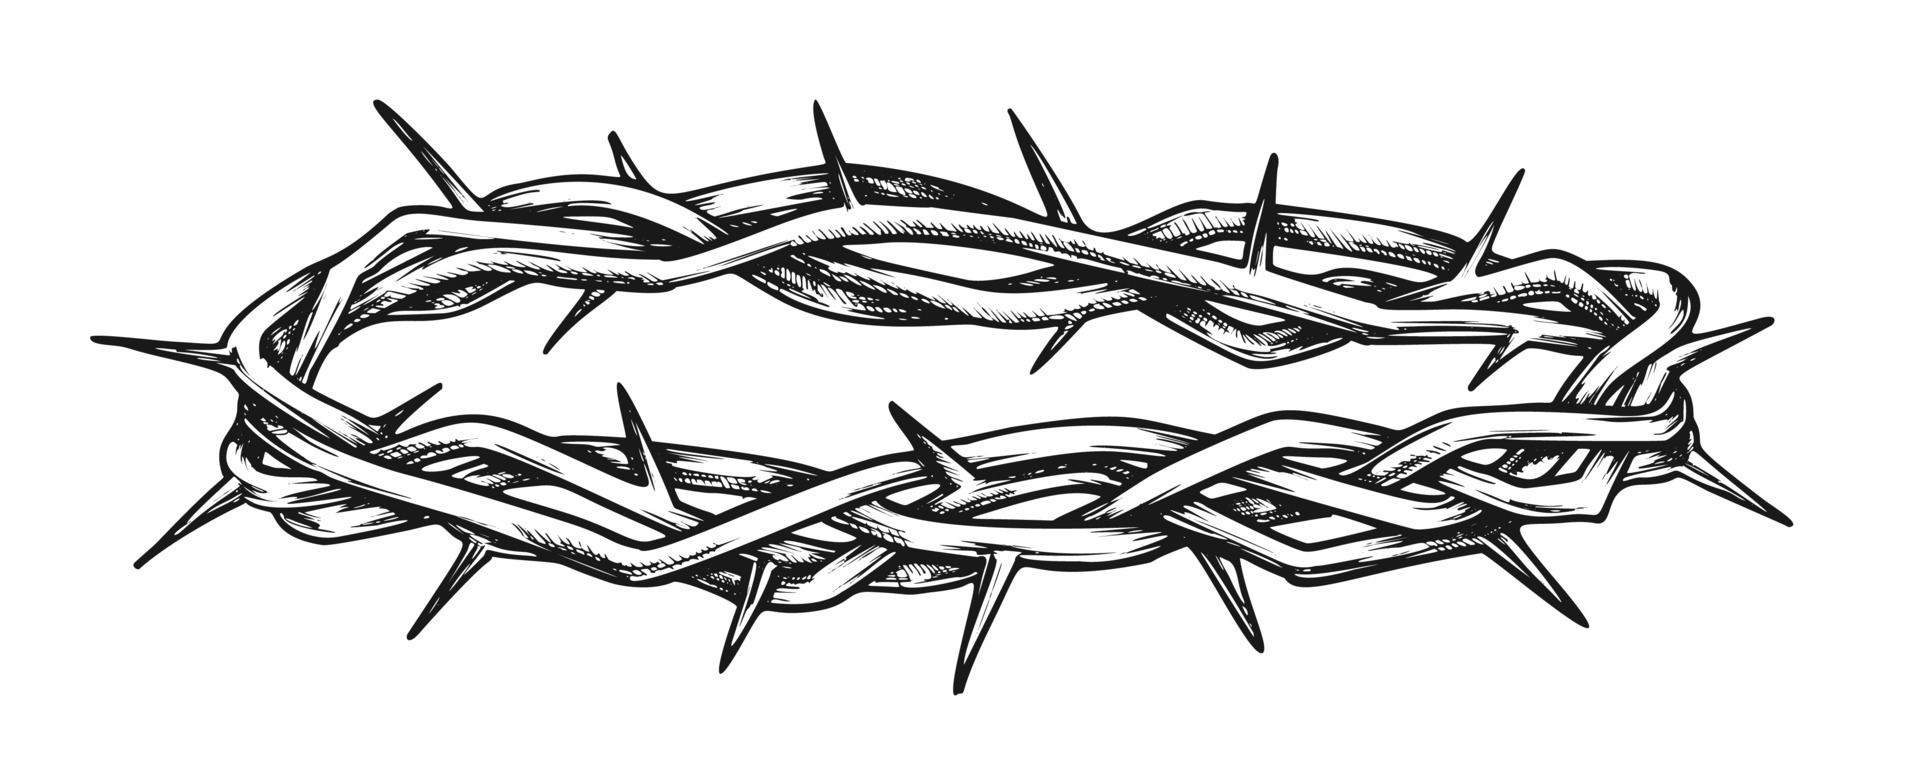 Crown of thorns drawing easy